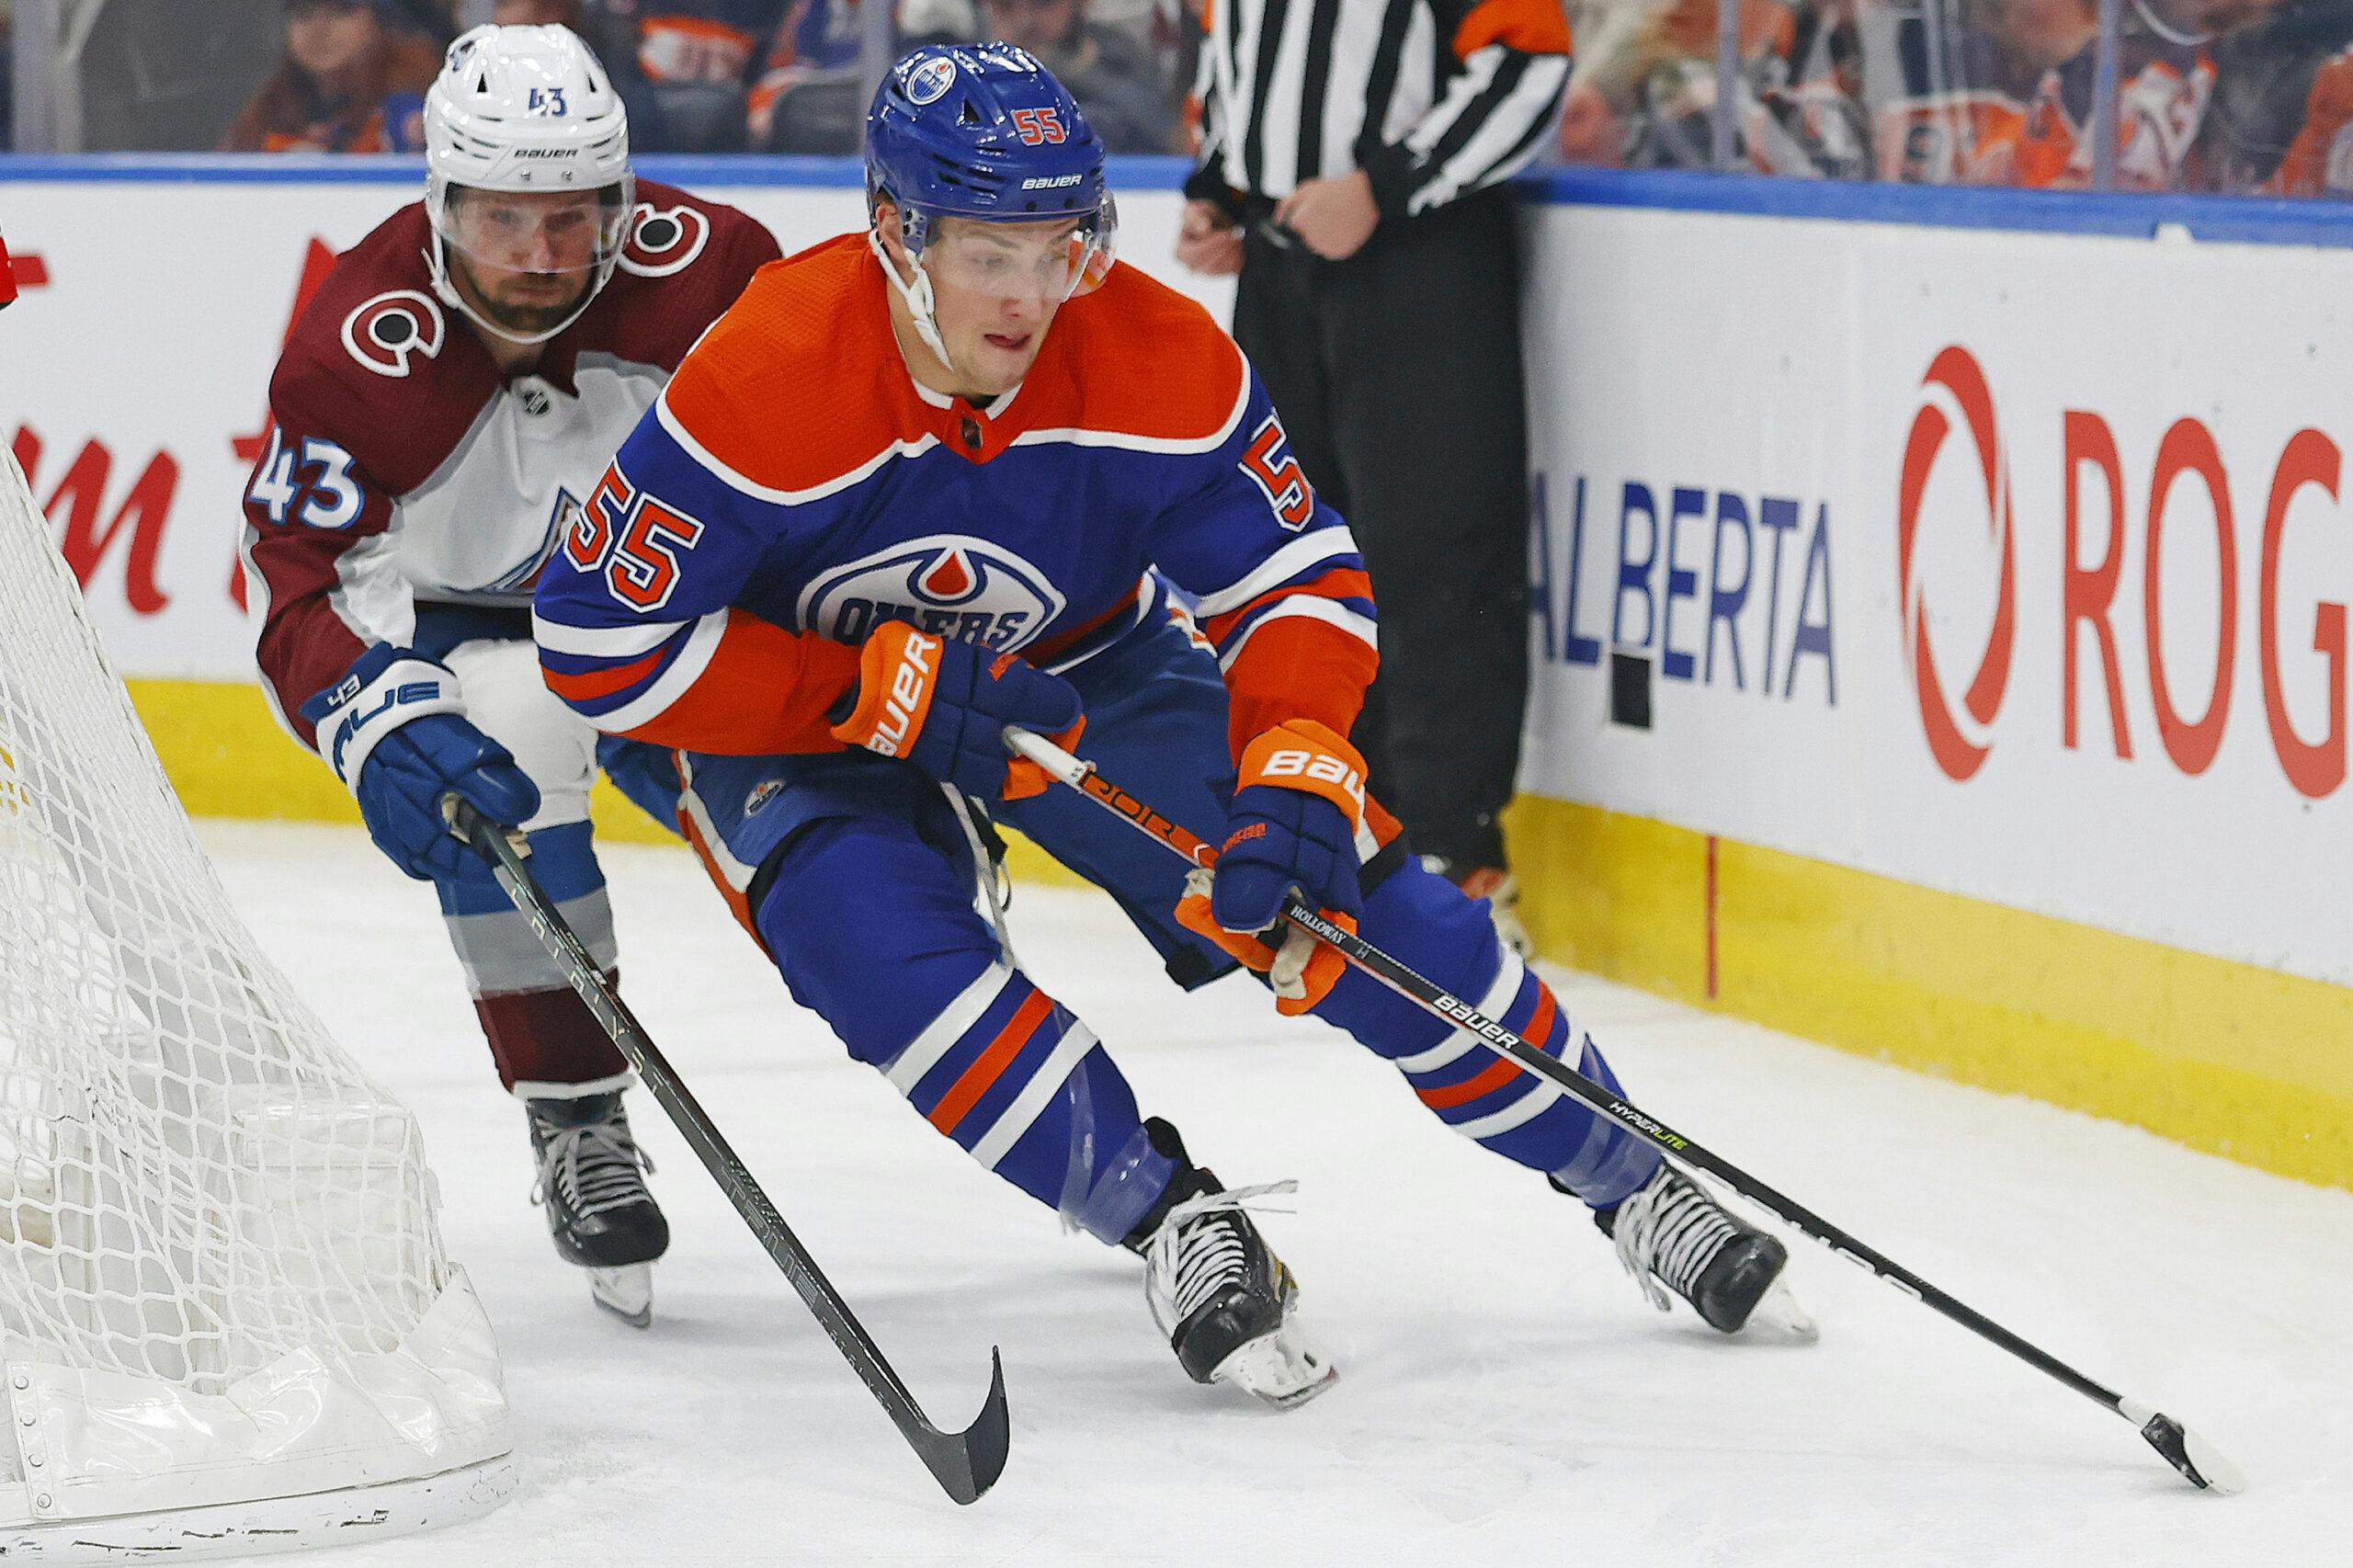 Dylan Holloway will miss “about a month” after suffering injury playing in  the AHL - OilersNation